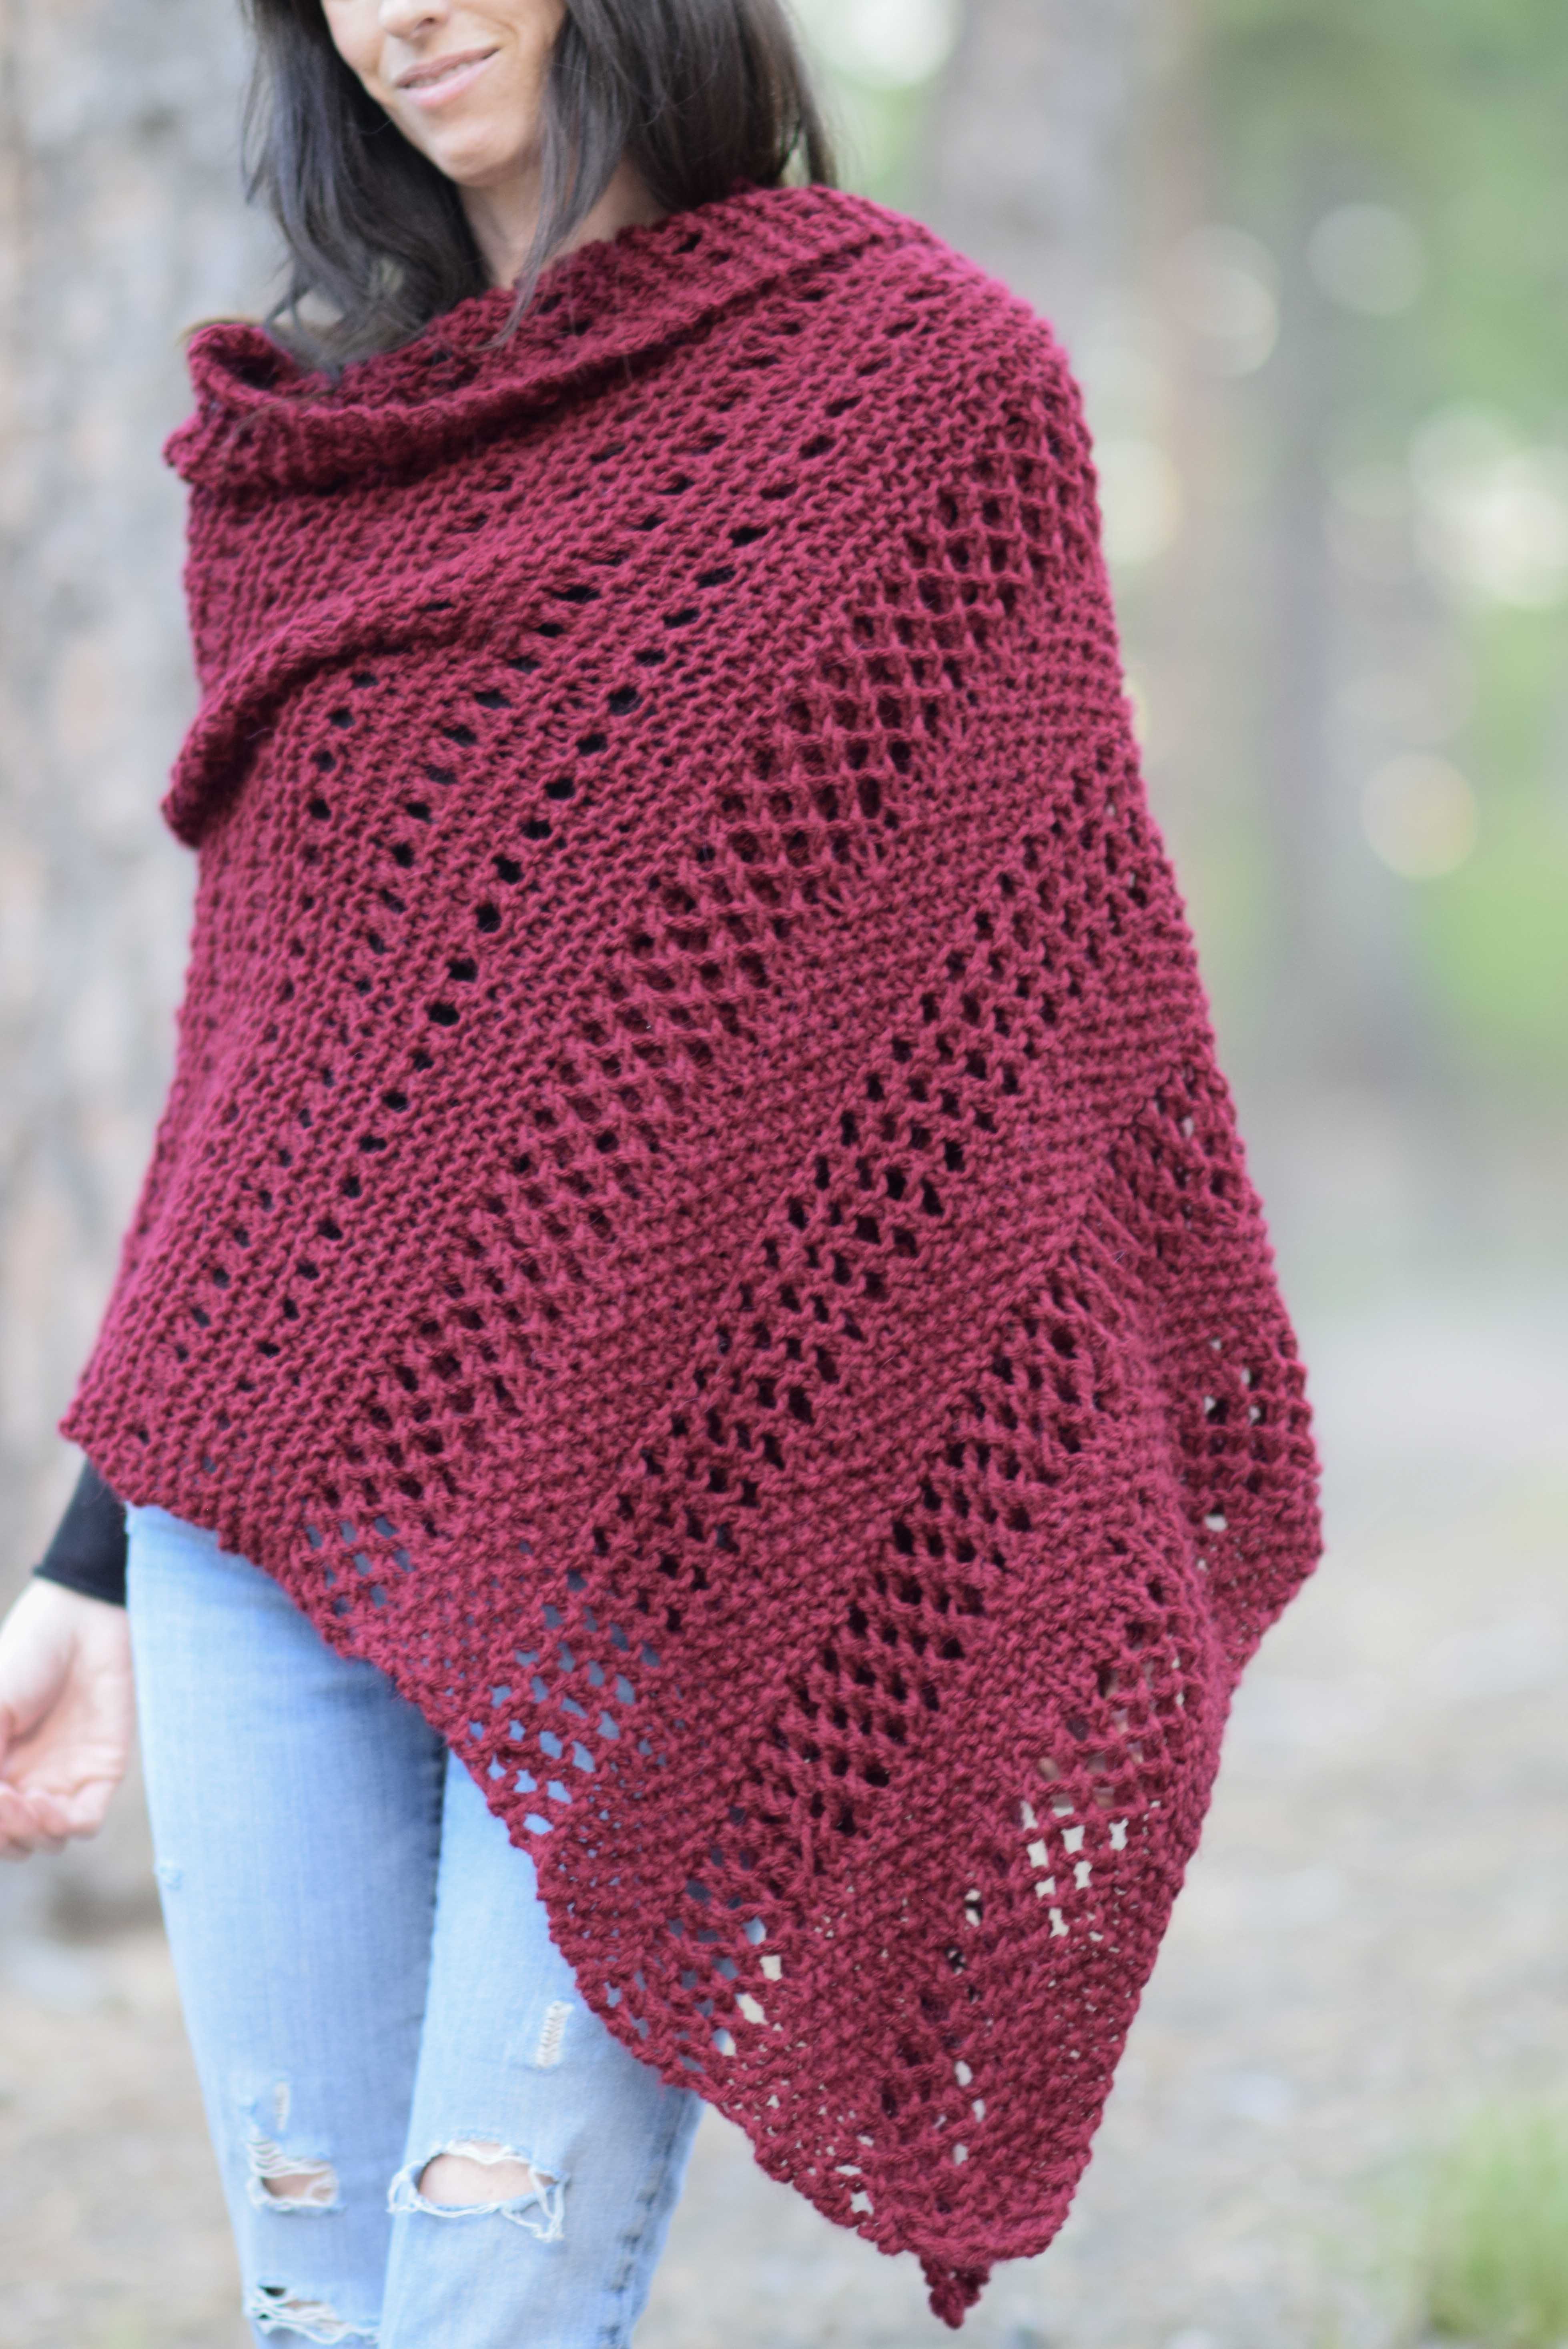 Patterns for knitted shawls and wraps